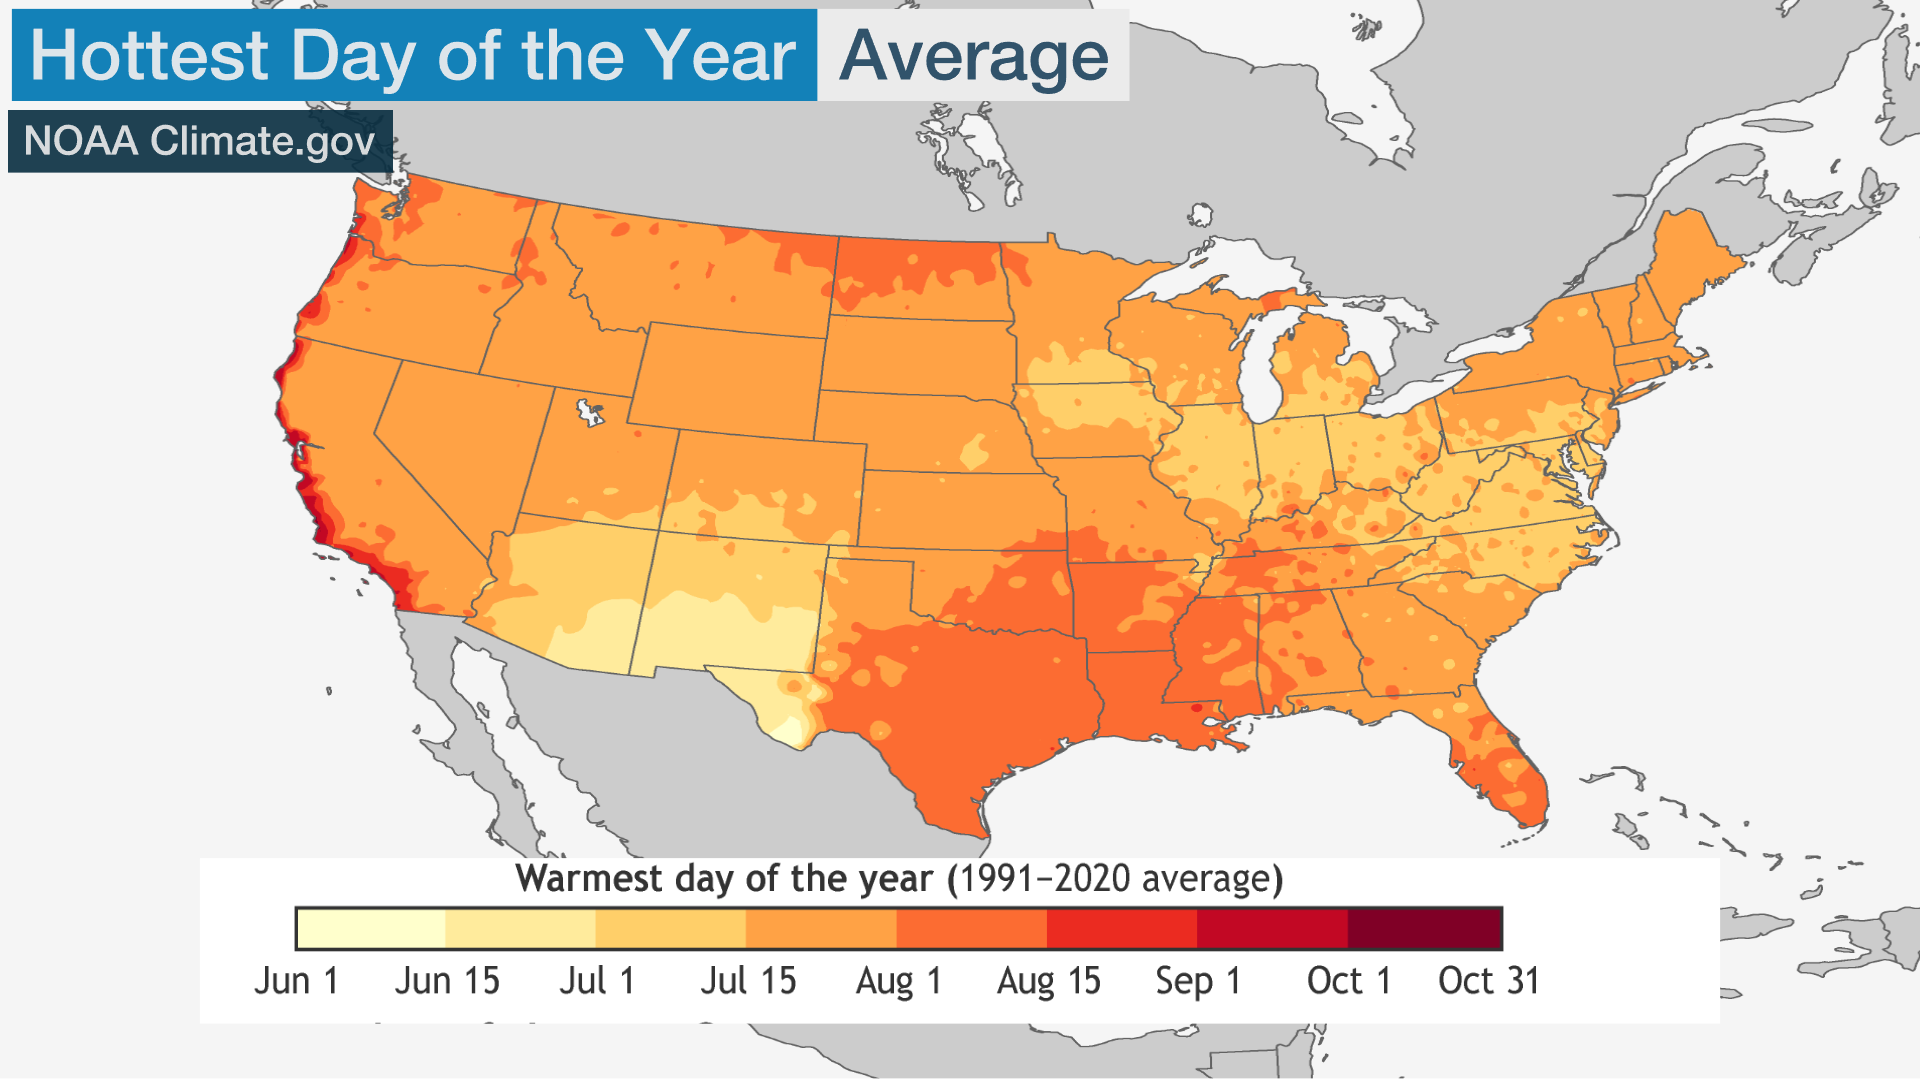 This graphic shows the typical hottest time of year, according to 1991-2020 average data.